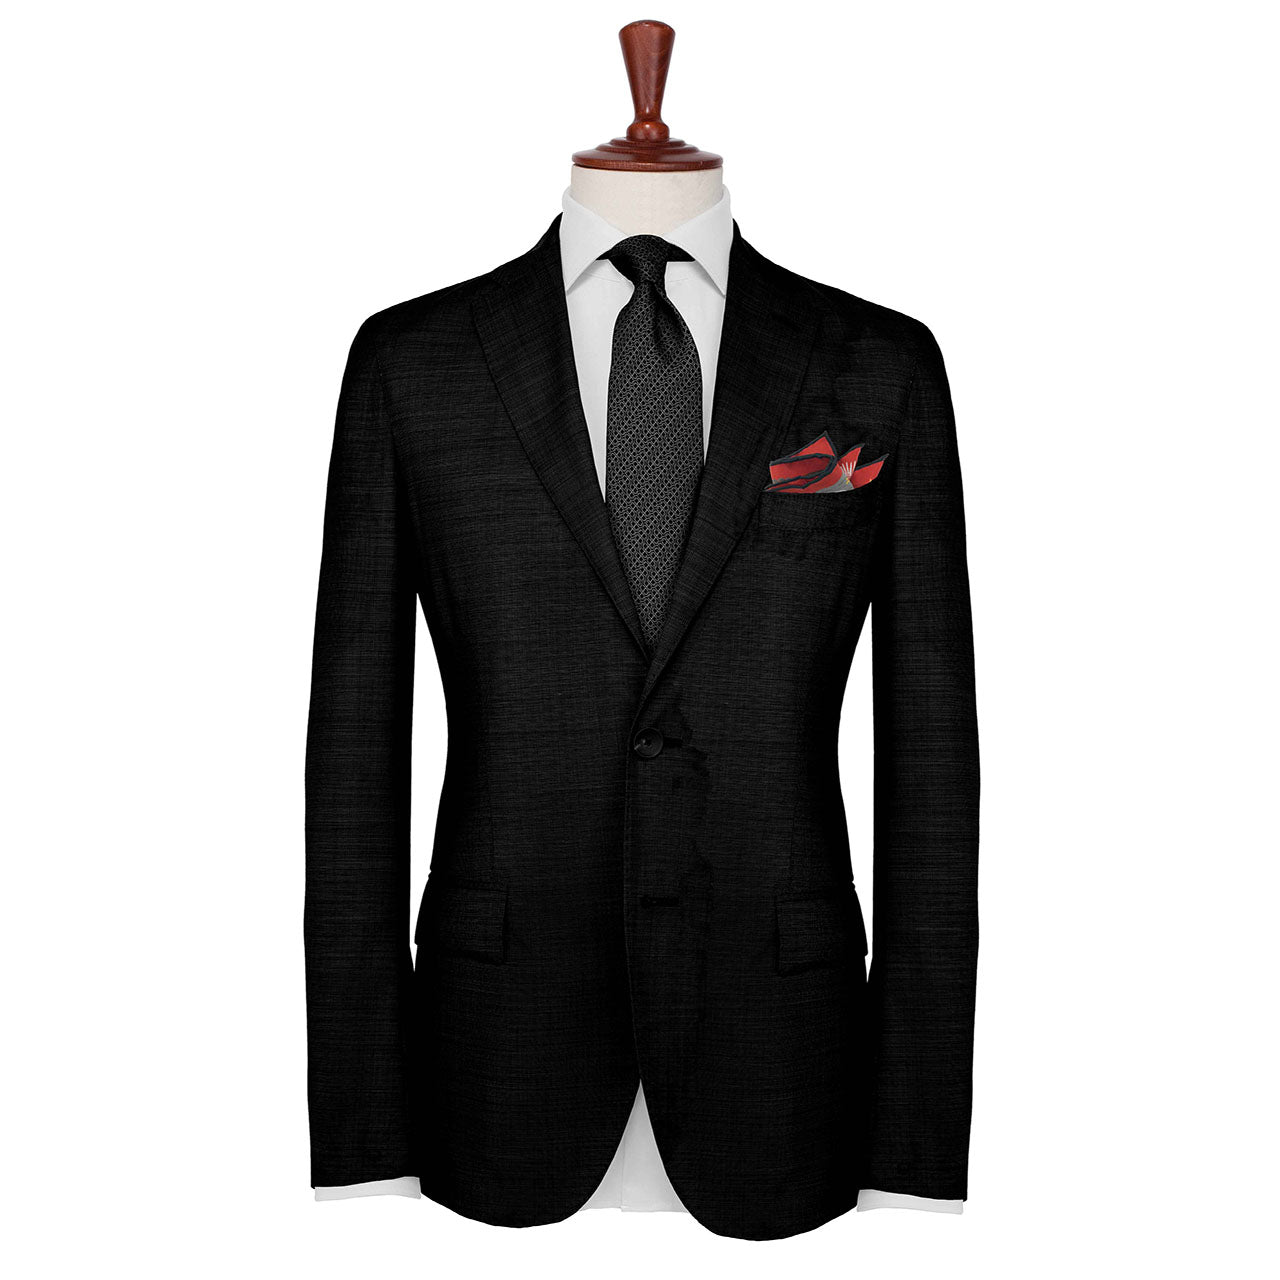 Les Chevaliers Blood Red Pocket Square